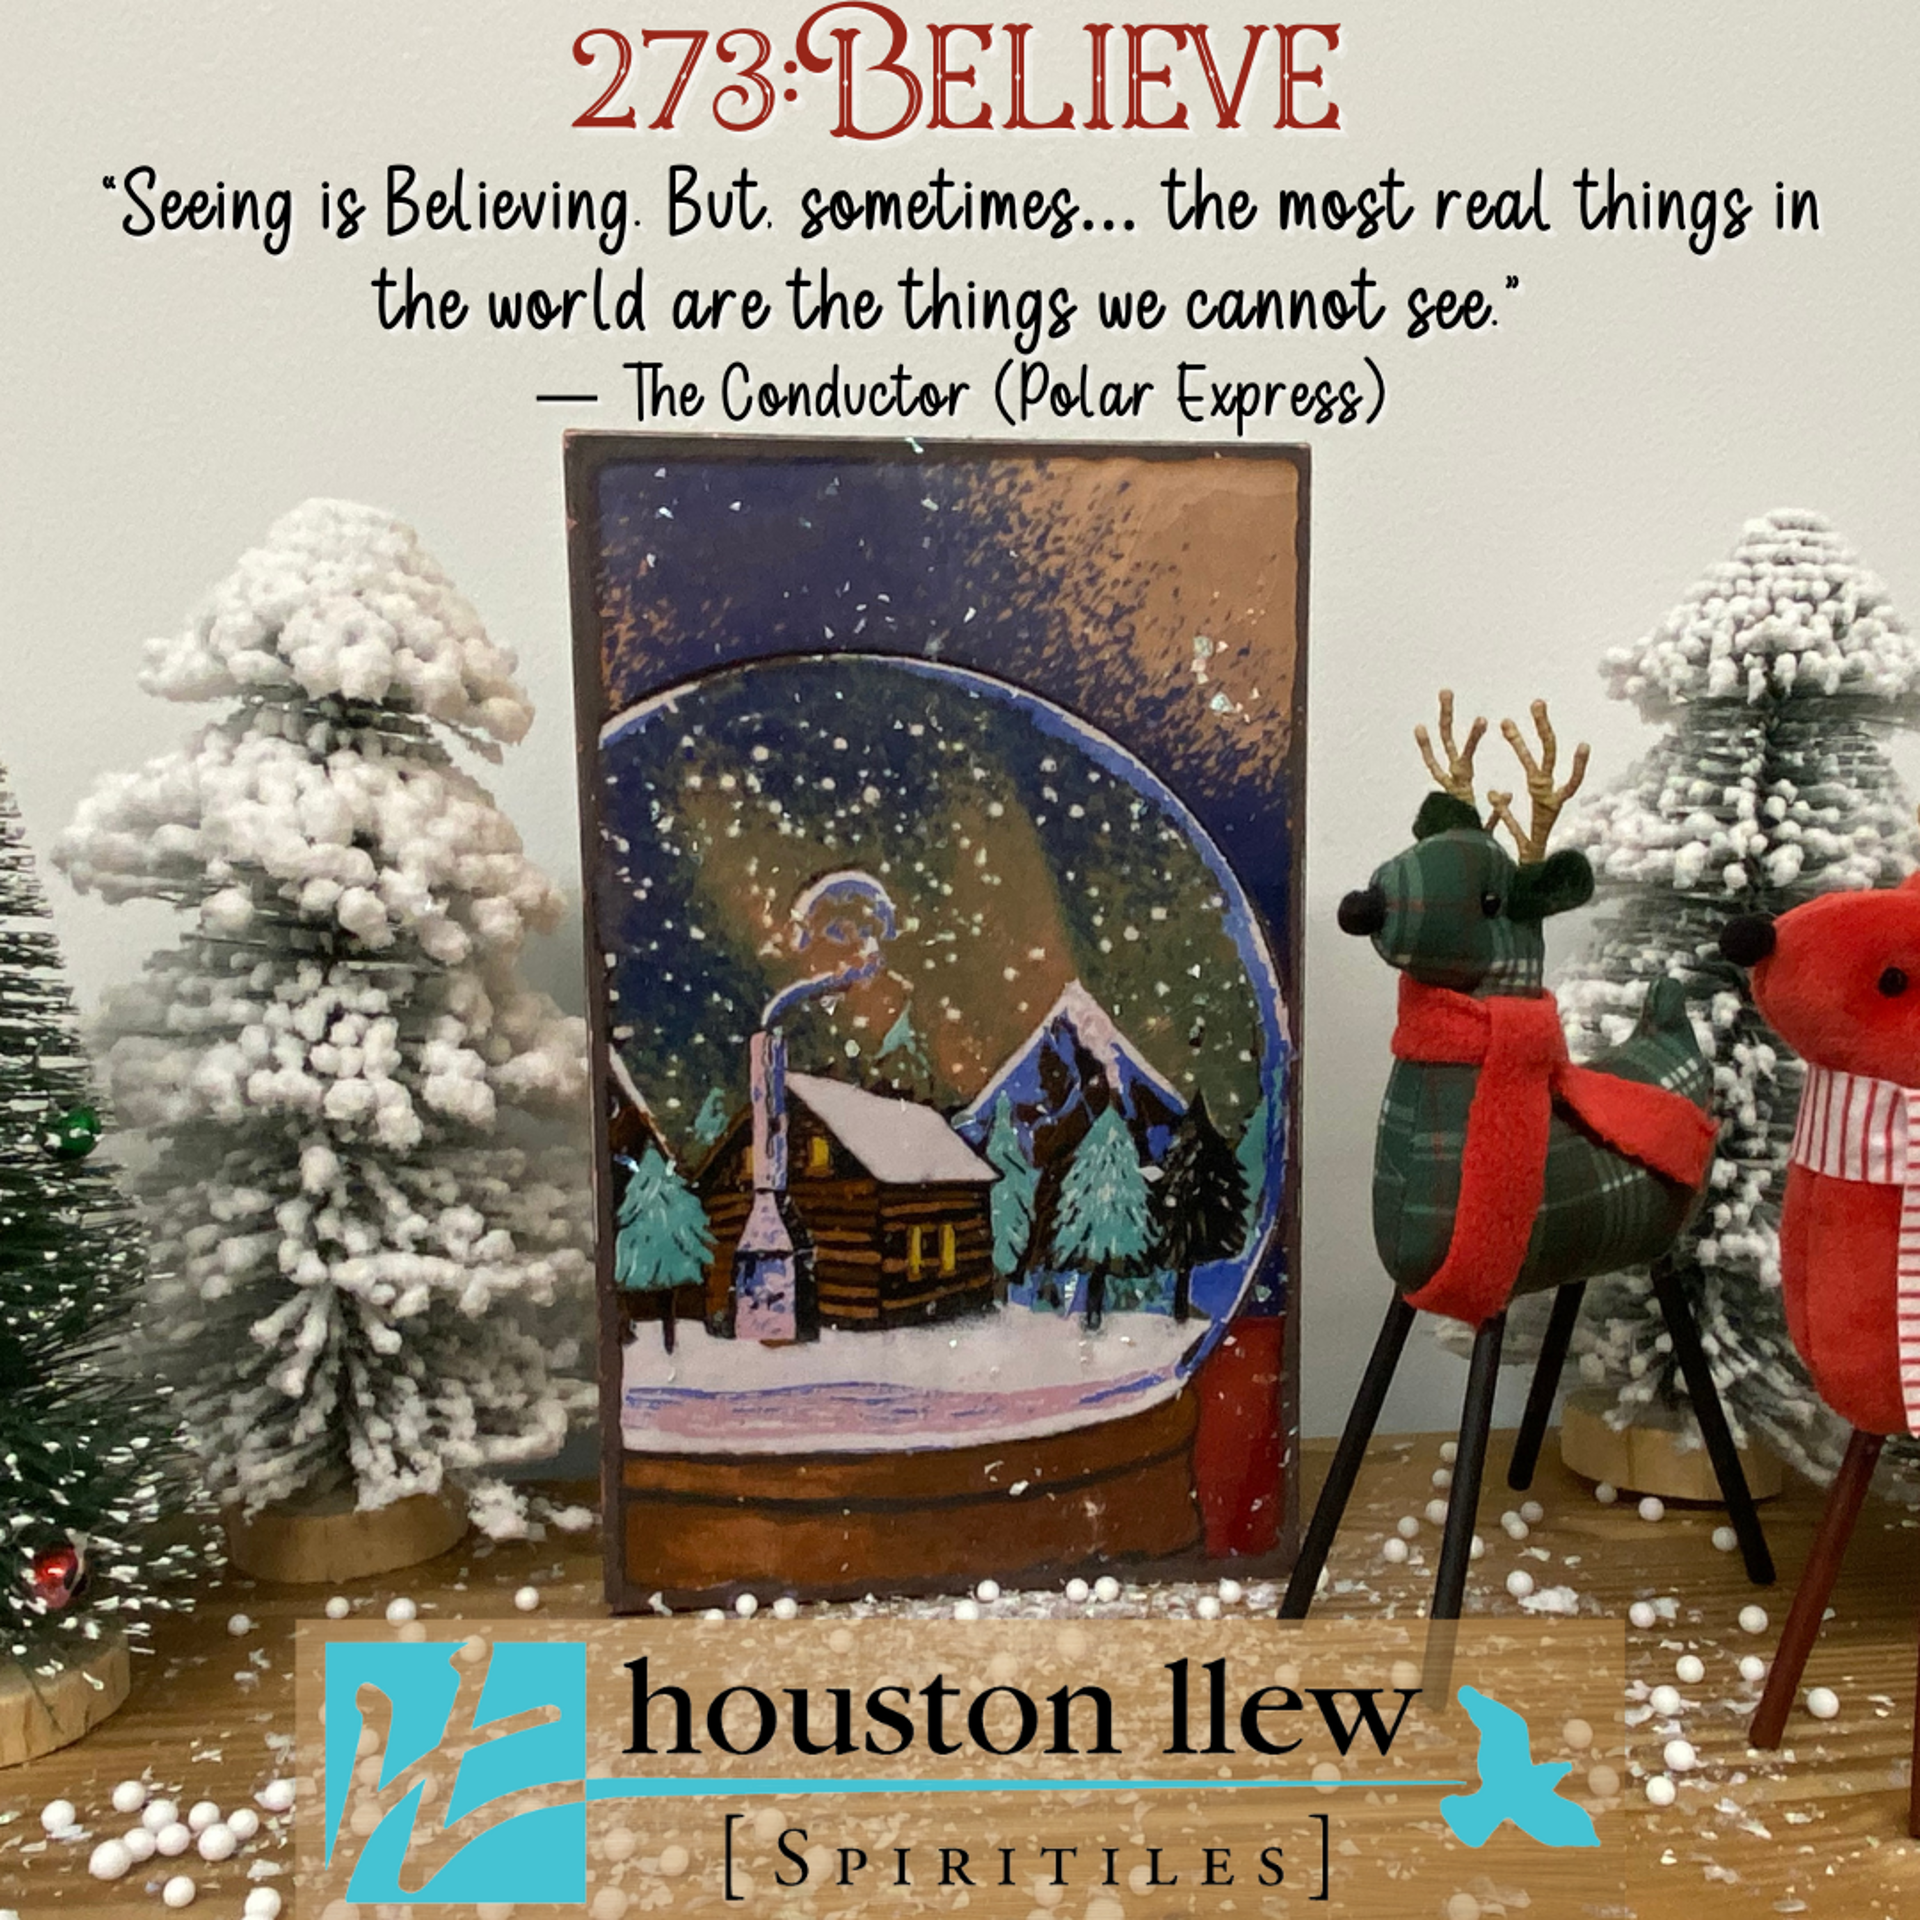 Believe - Limited Edition Christmas Spiritile “Seeing is Believing. But, sometimes… the most real things in the world are the things we cannot see.” -The Conductor (Polar Express) by Houston Llew